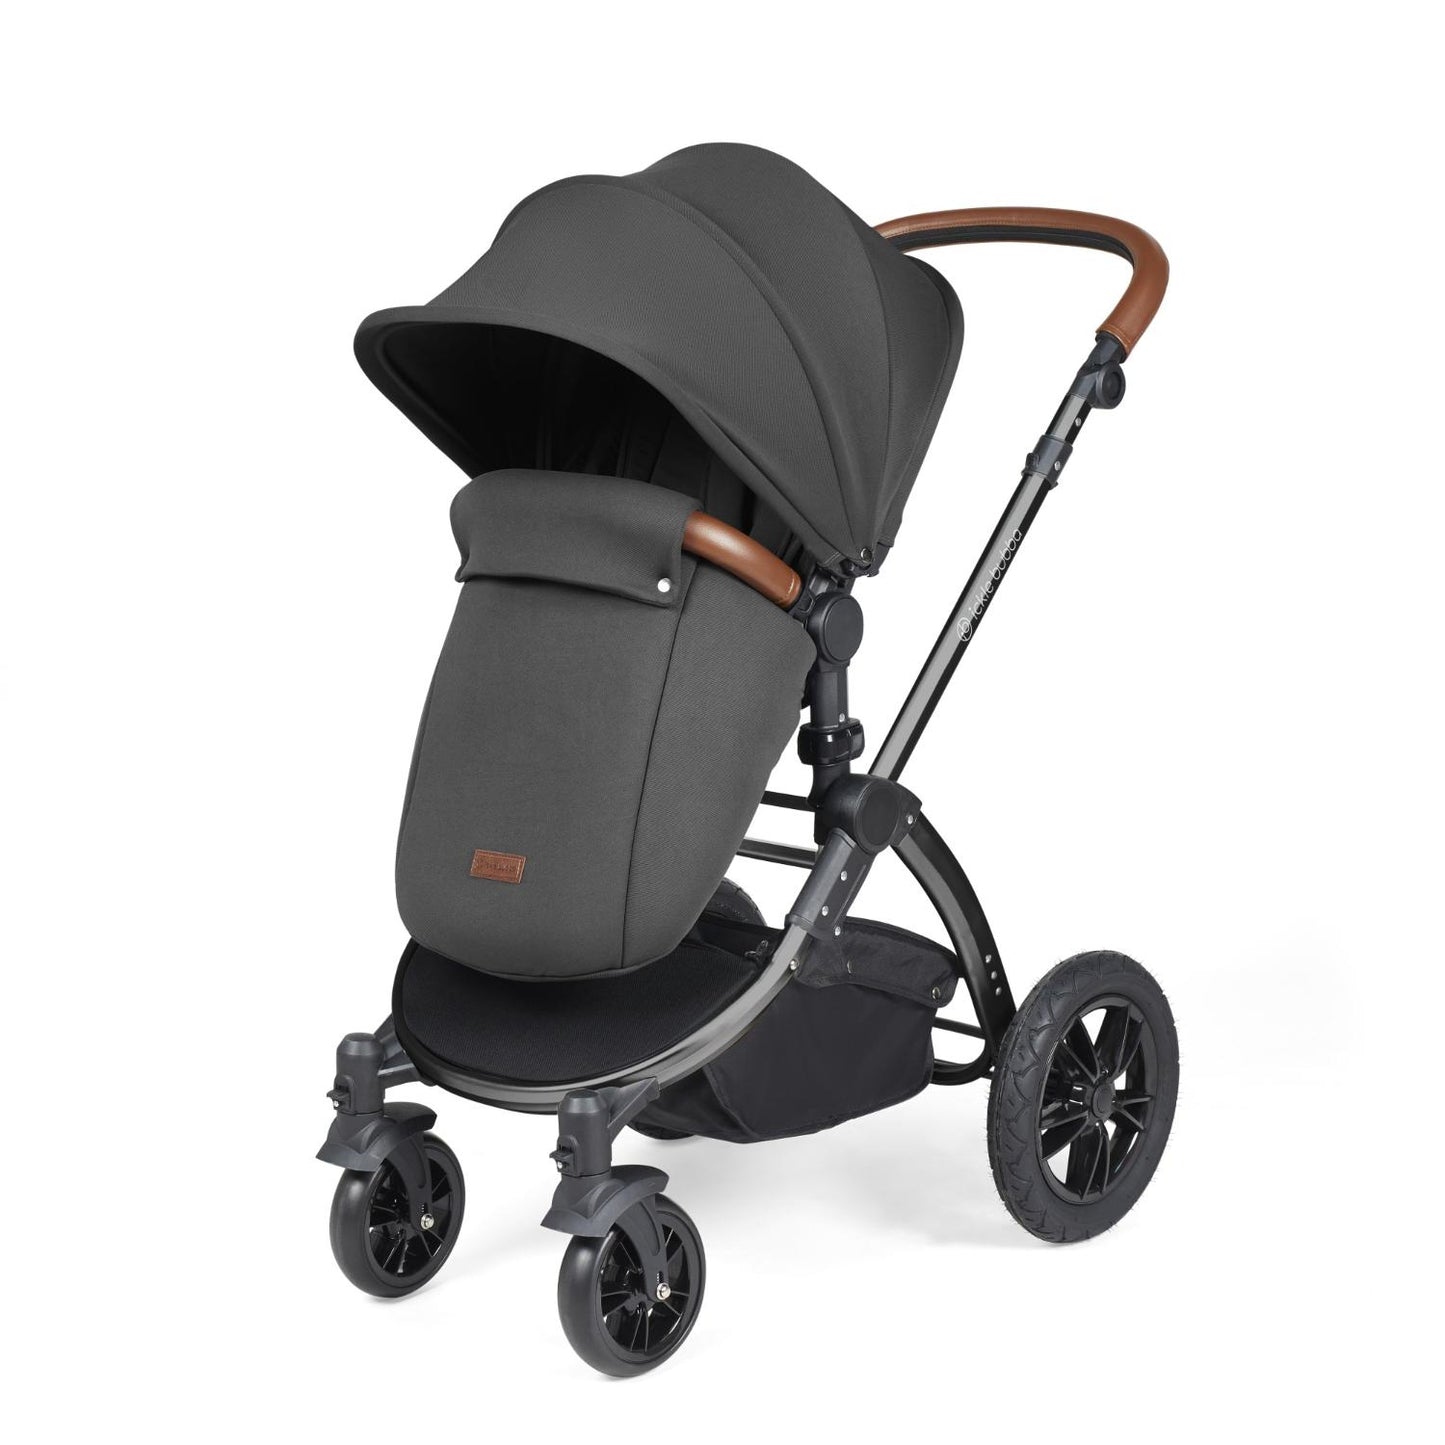 Ickle Bubba Stomp Luxe Pushchair with foot warmer attached in Charcoal Grey colour with tan handle